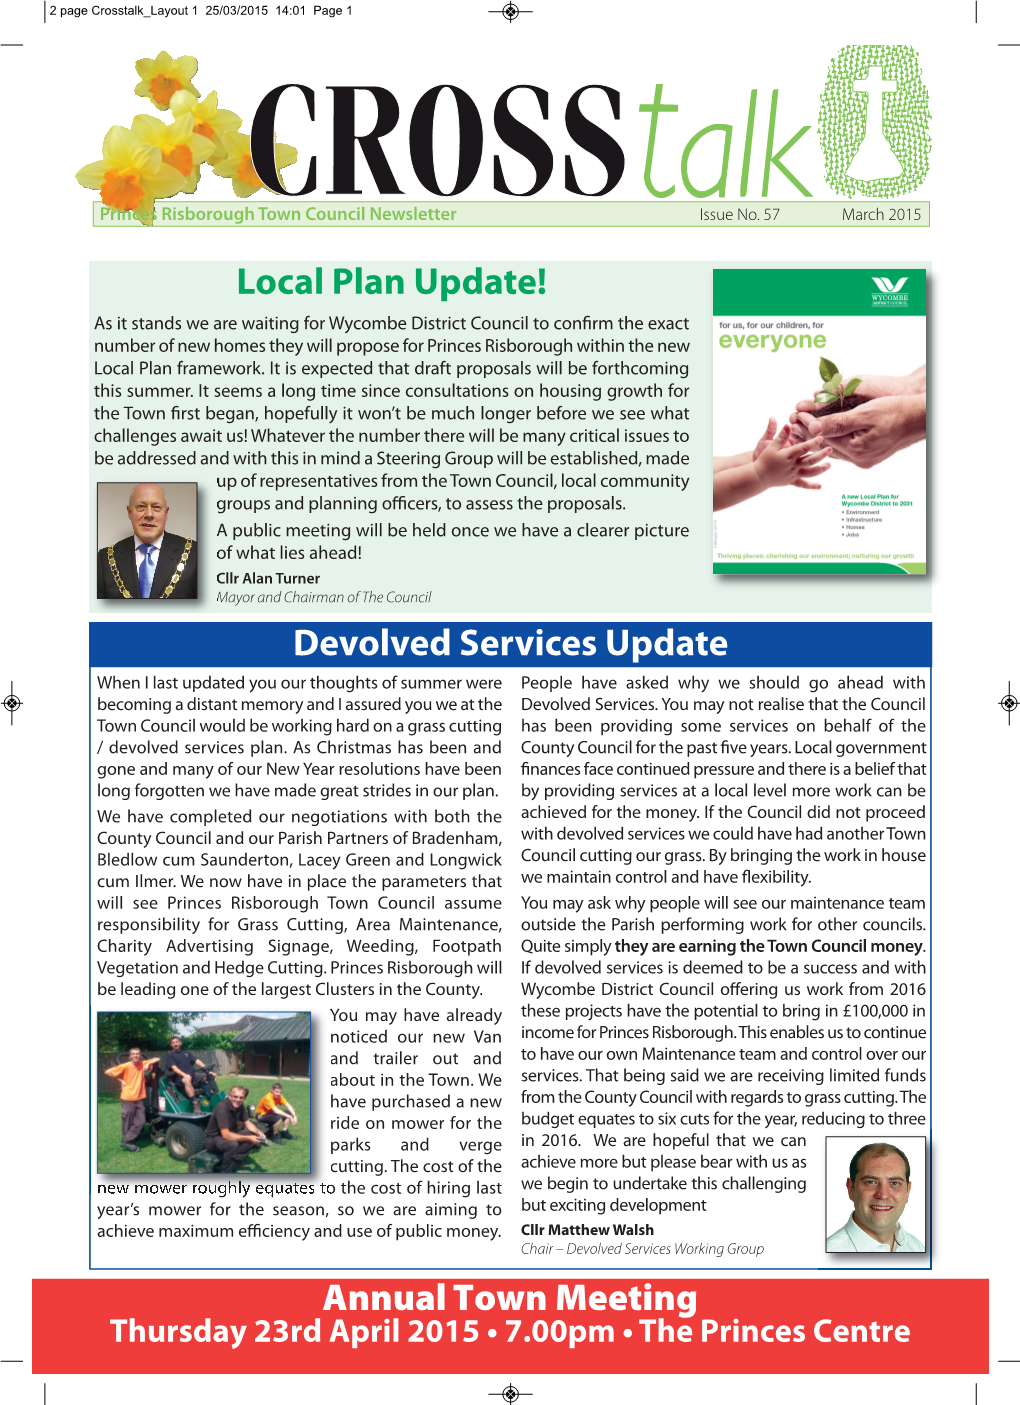 Devolved Services Update Annual Town Meeting